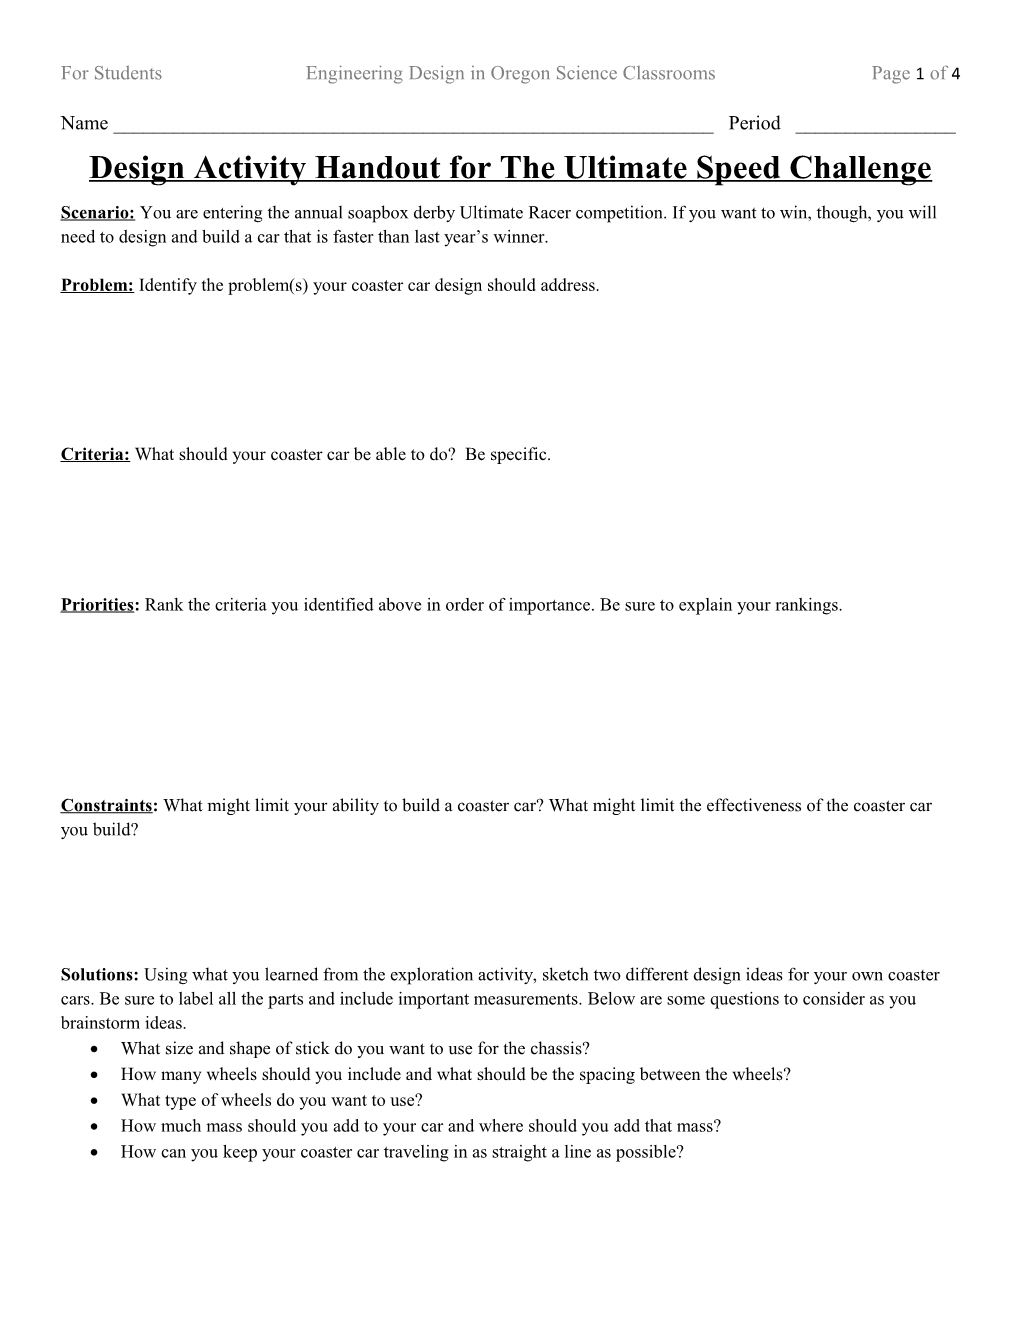 Design Activity Handout for the Ultimate Speed Challenge